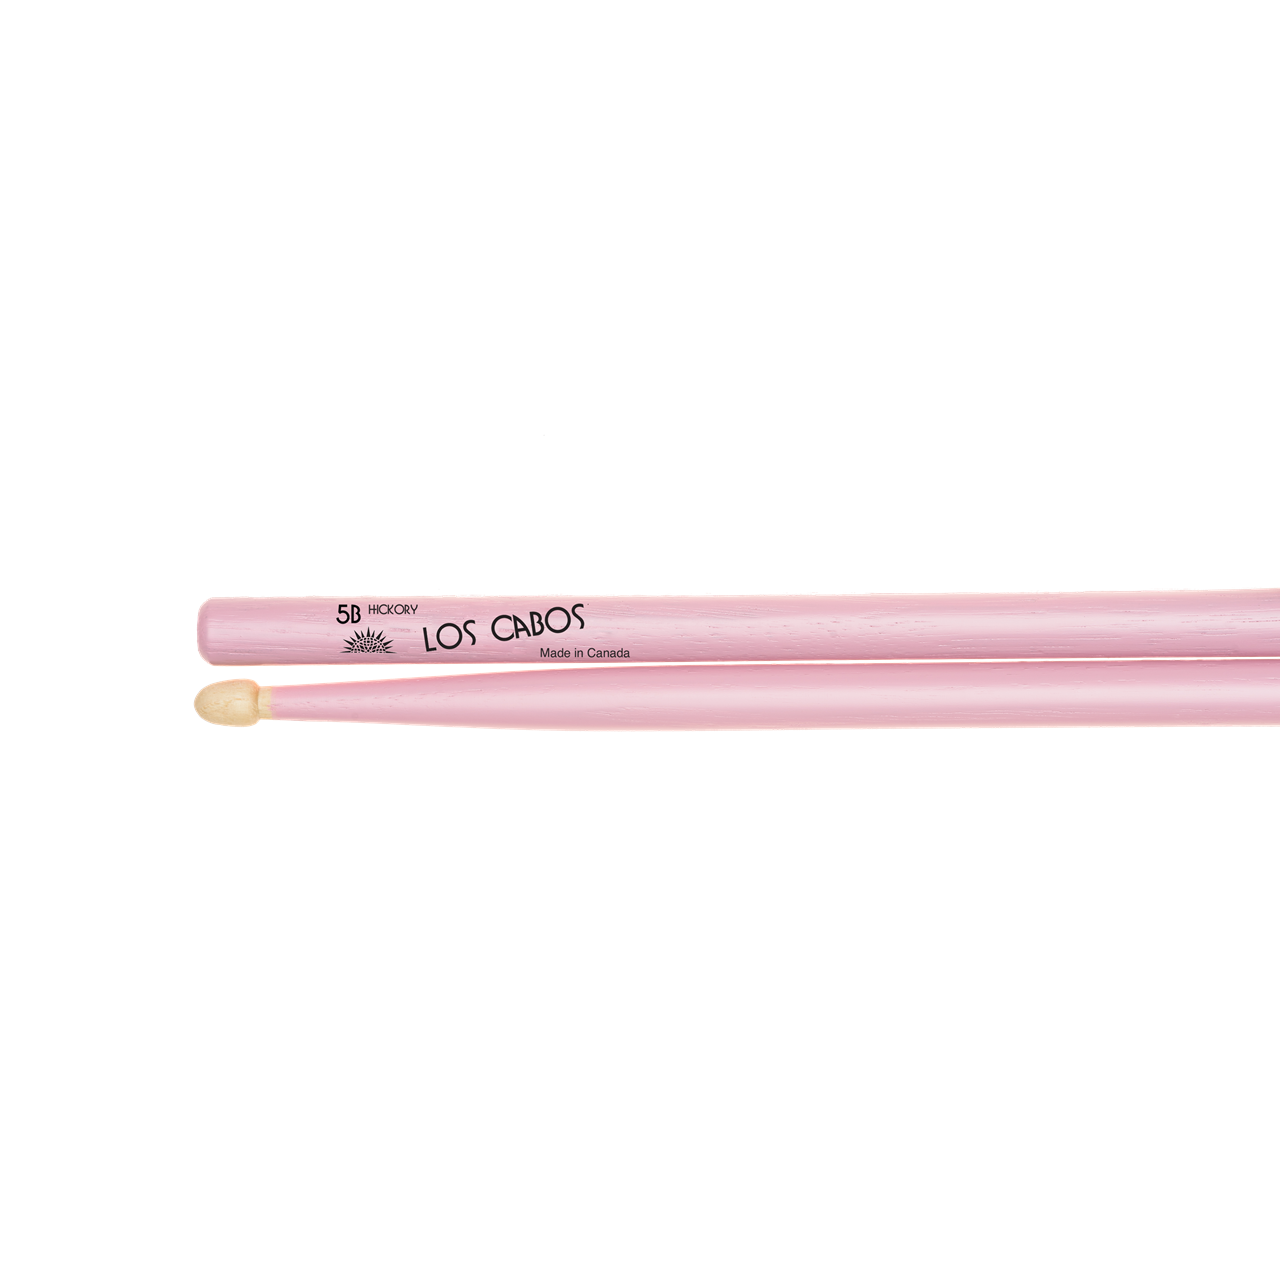 Los Cabos Drumstick 5B Pink, White Hickory